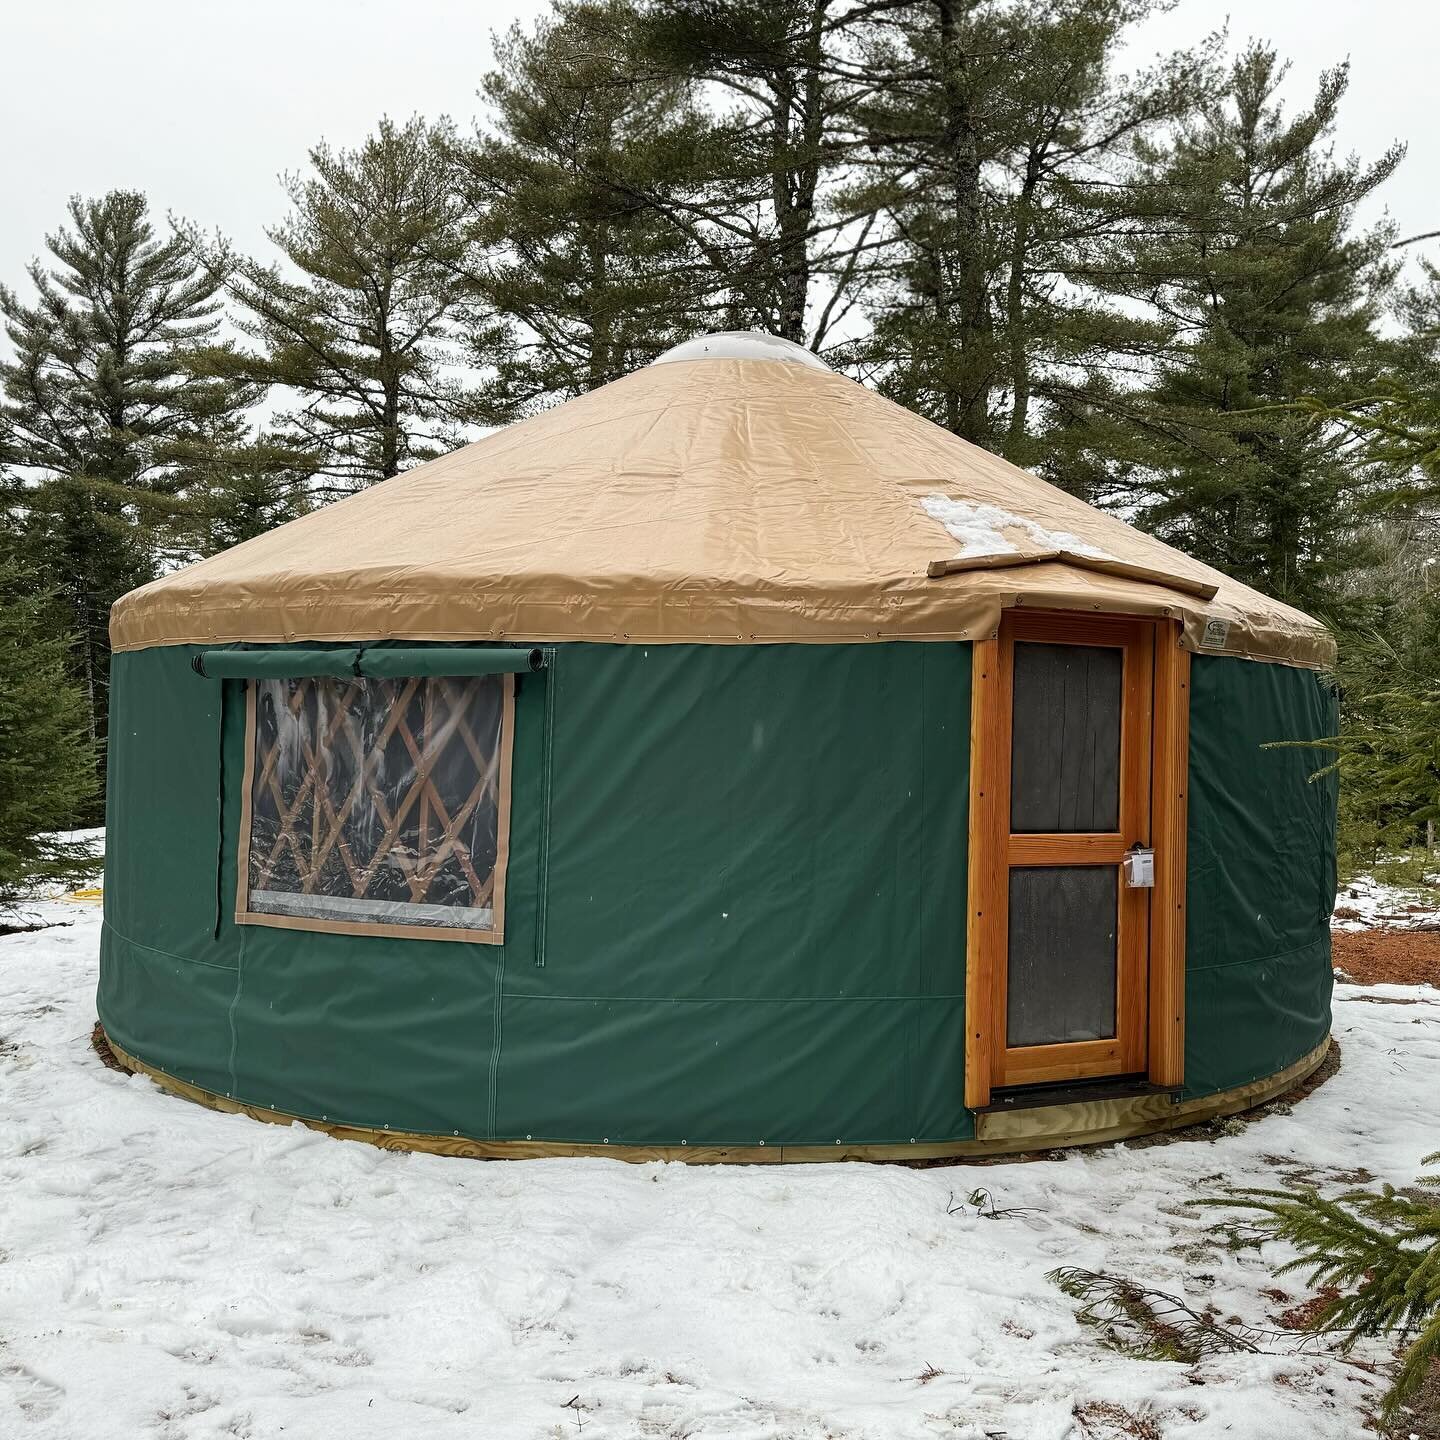 We&rsquo;re so thrilled to have all 8 of our yurts up! Here are just some photos of a few before we start working on finishing the interior with flooring, kitchen, bathroom, beds and heat-pumps coming soon! 

#mainelife #yurtlife #seasonalwork #glamp